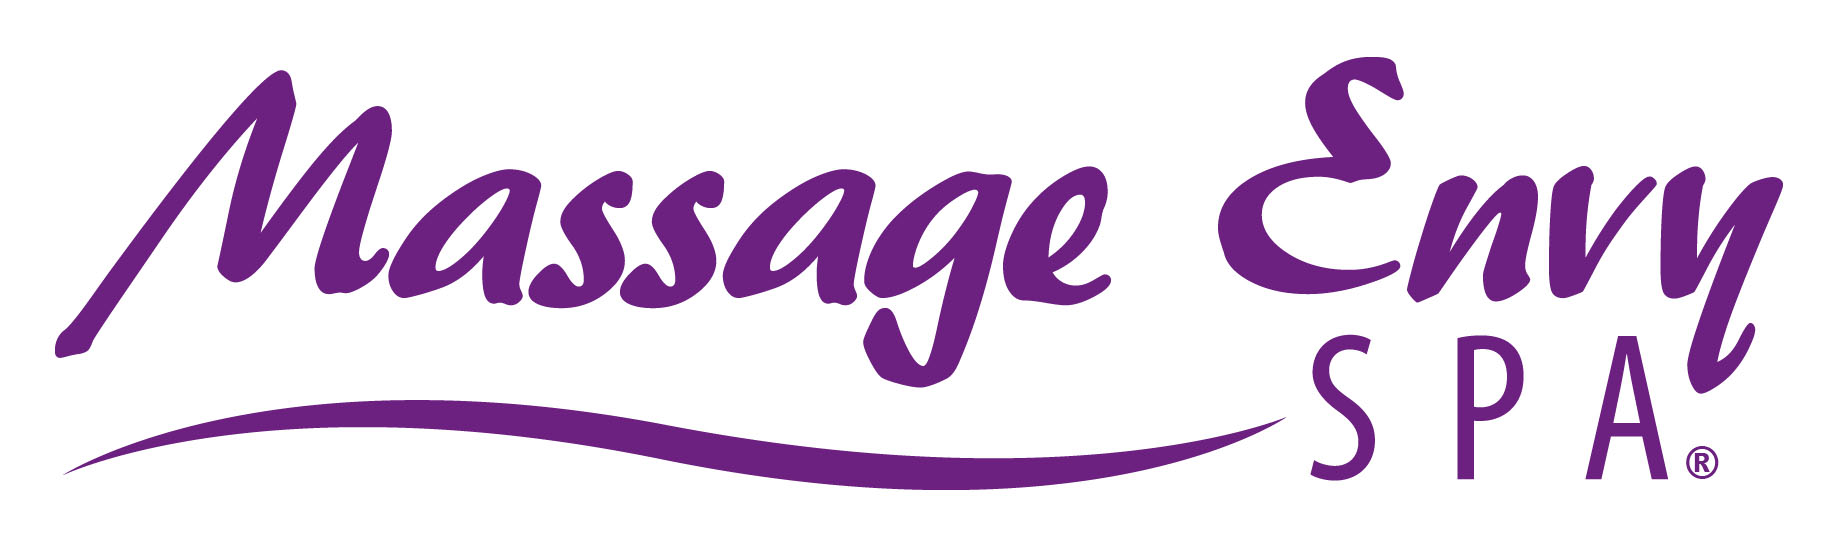 CG Funk of Massage Envy Spa to be Inducted into Massage Therapy Hall of Fame, MASSAGE Magazine